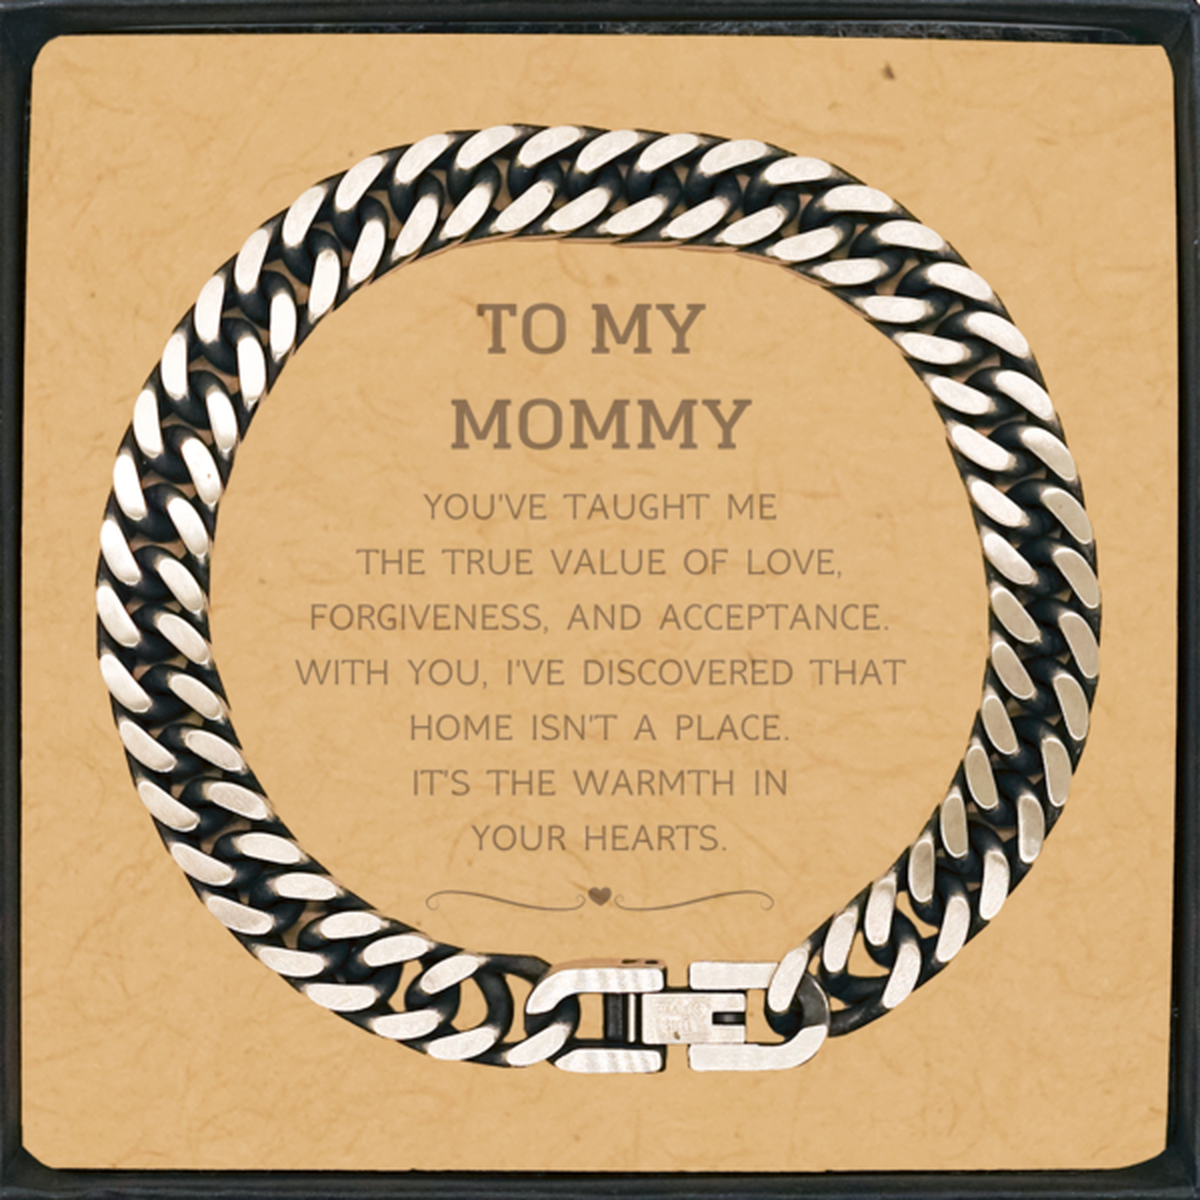 To My Mommy Gifts, You've taught me the true value of love, Thank You Gifts For Mommy, Birthday Cuban Link Chain Bracelet For Mommy